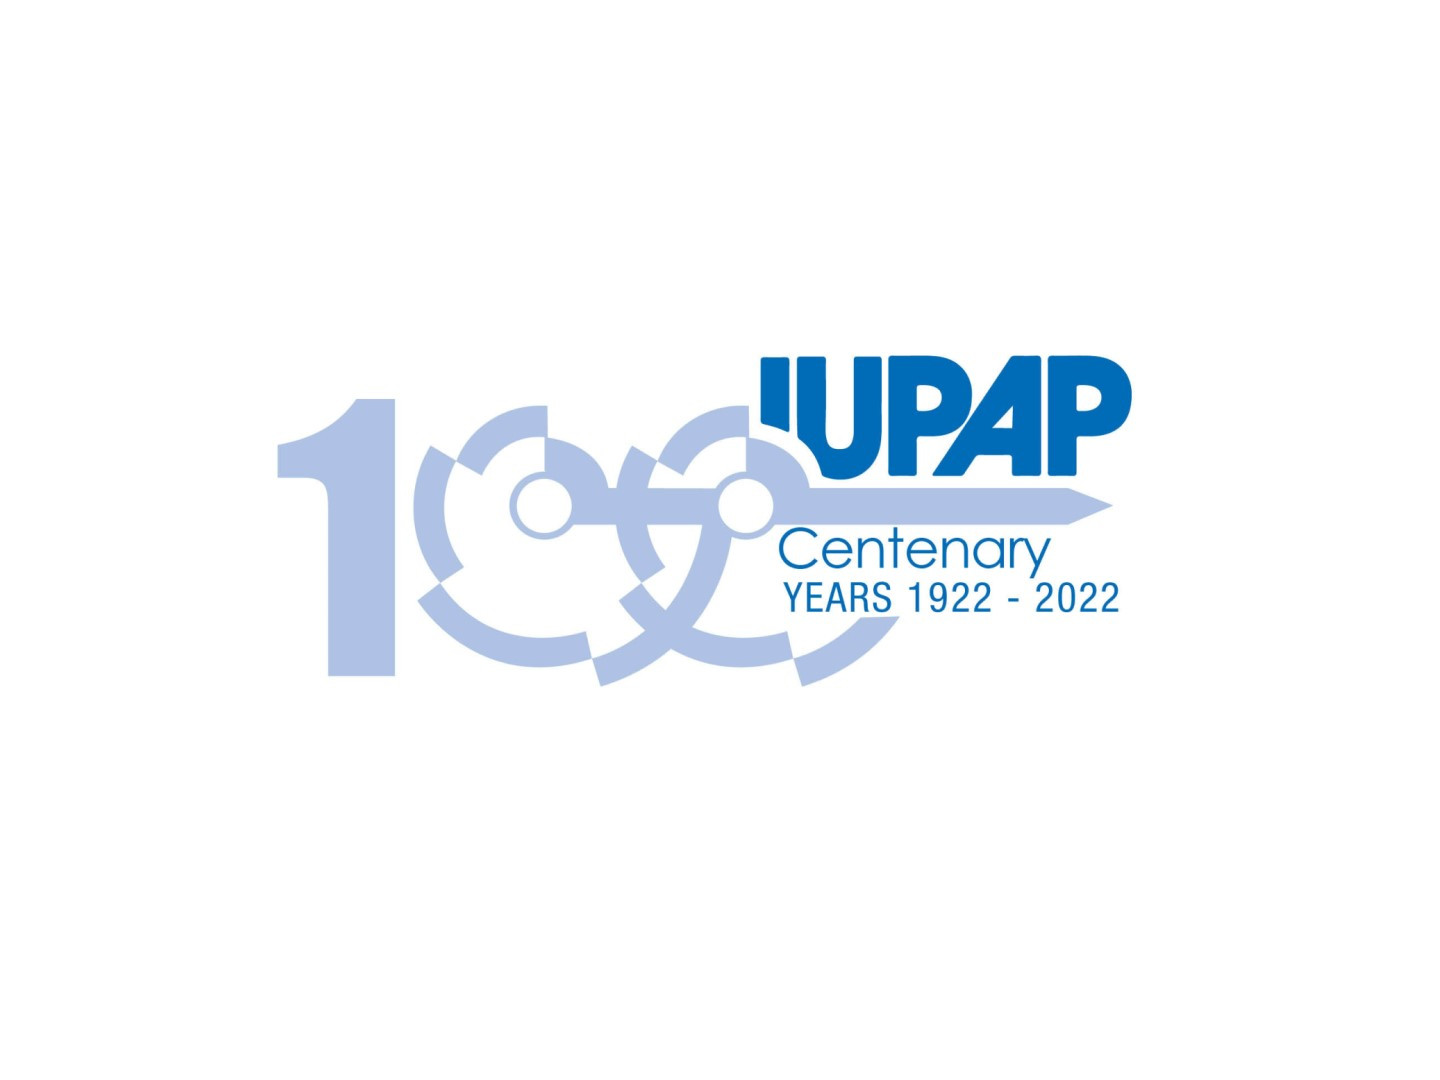  First Asia-Pacific IUPAP event on IUPAP 100 anniversary 